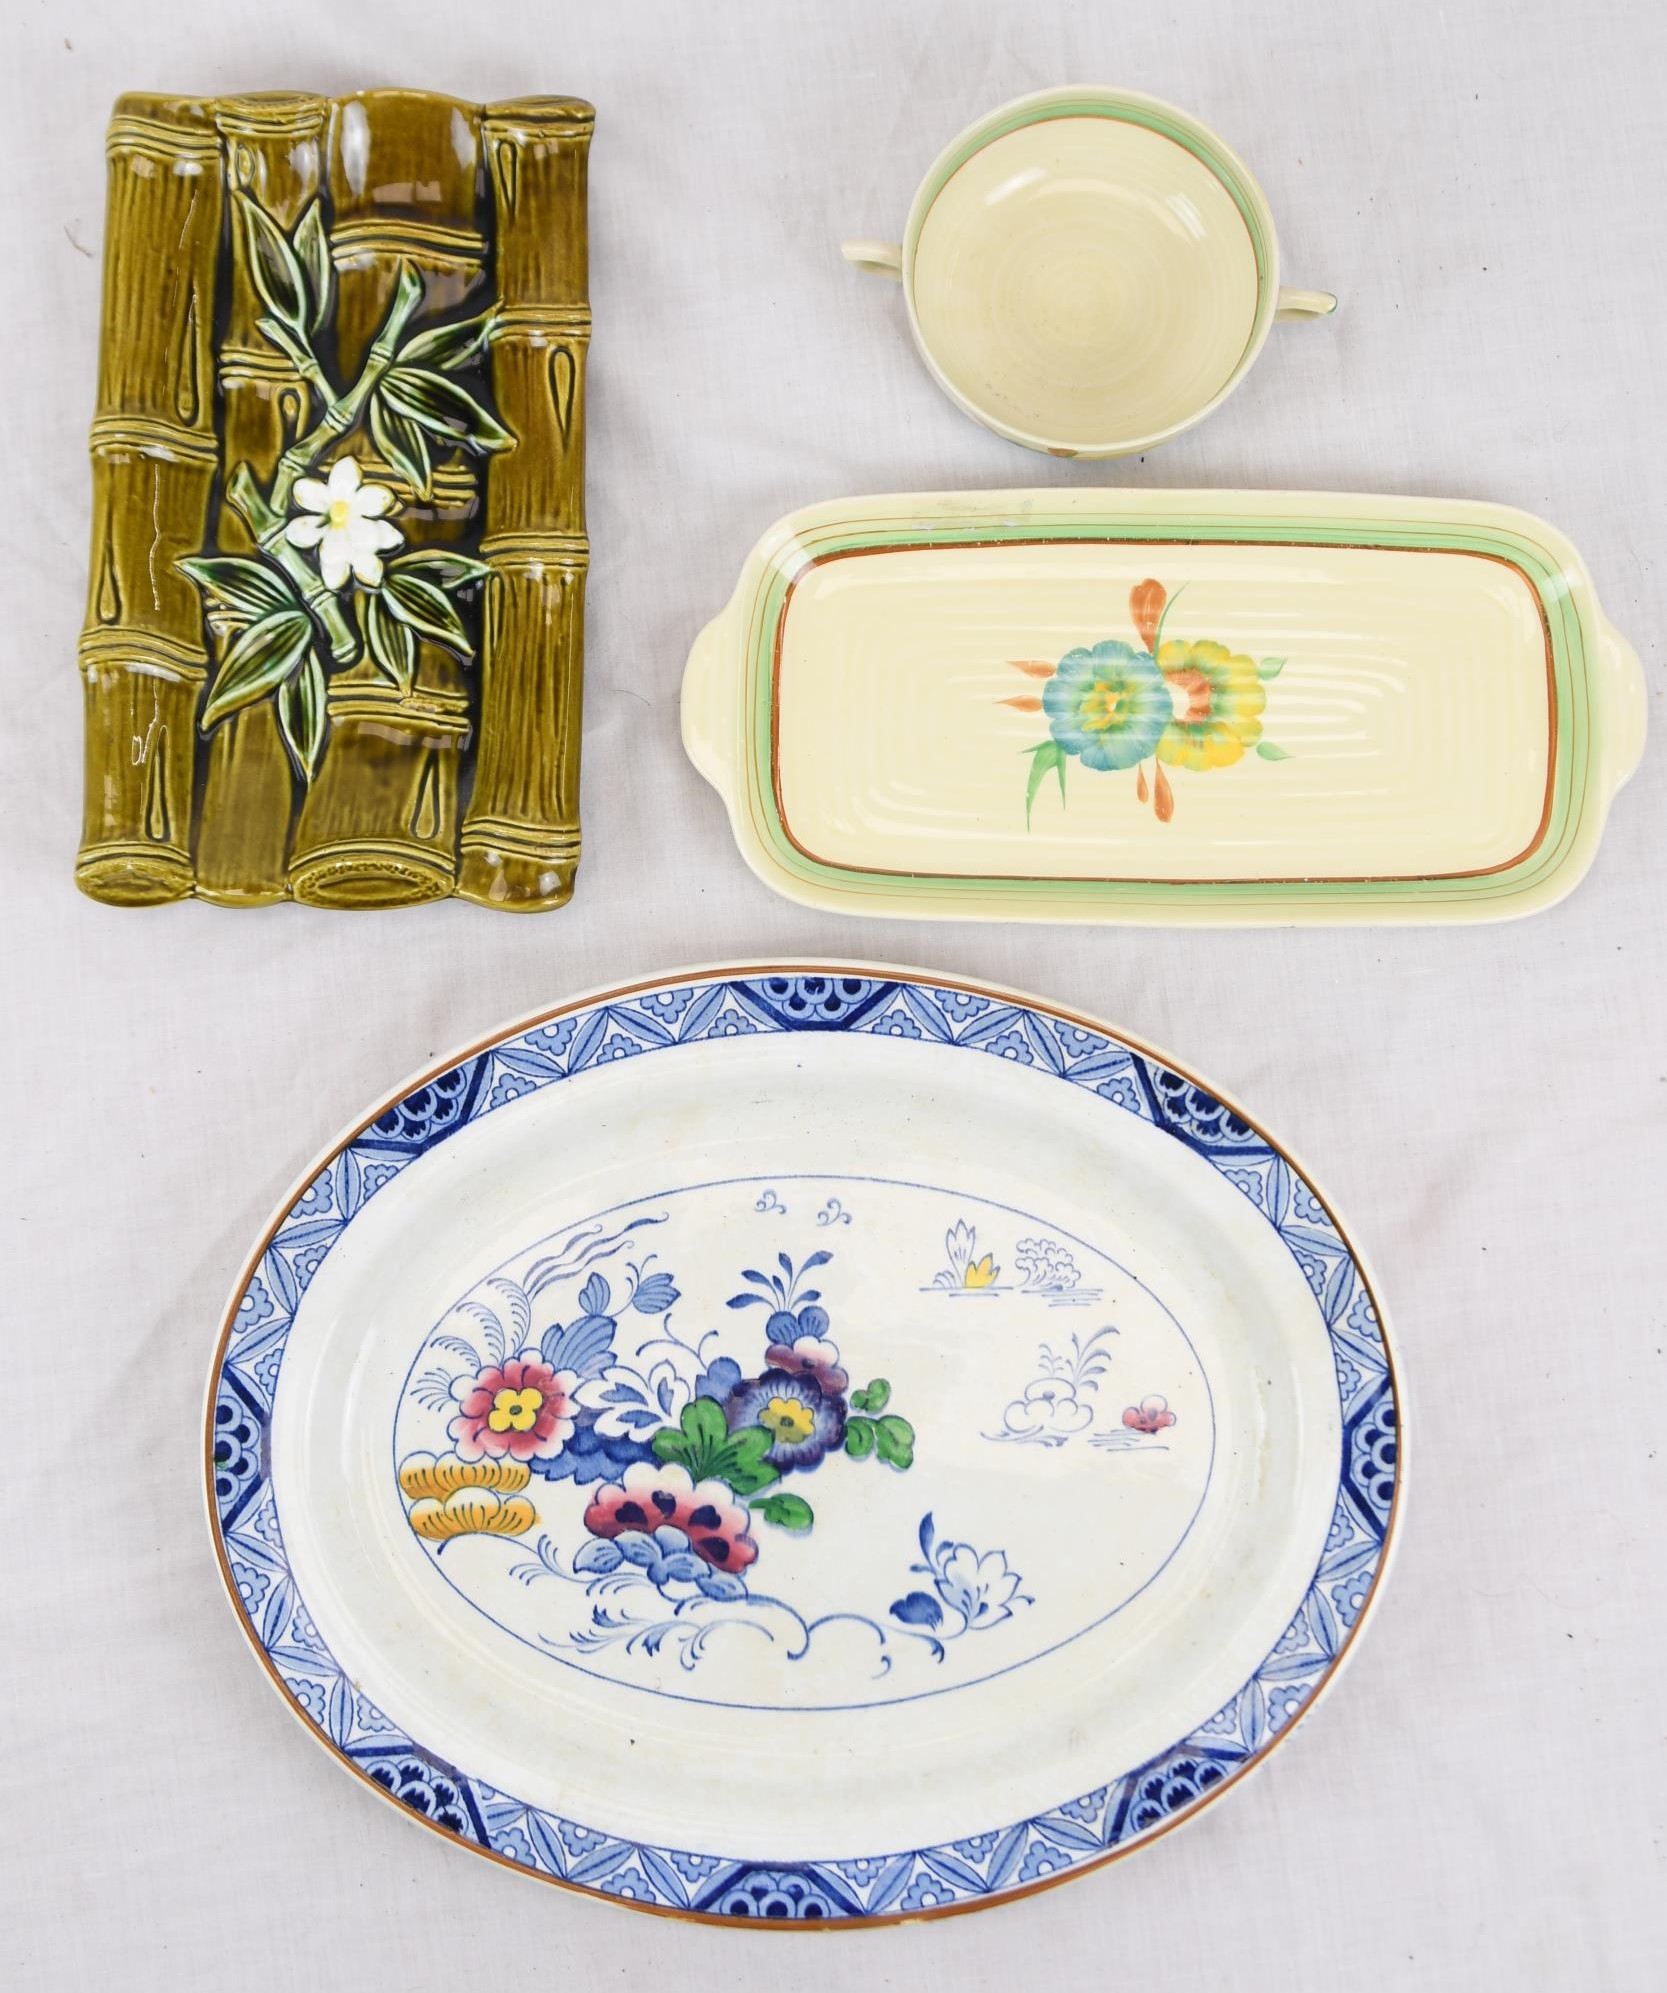 A mixed collection of ceramics. Including a plate made by Booths, Netherlands.